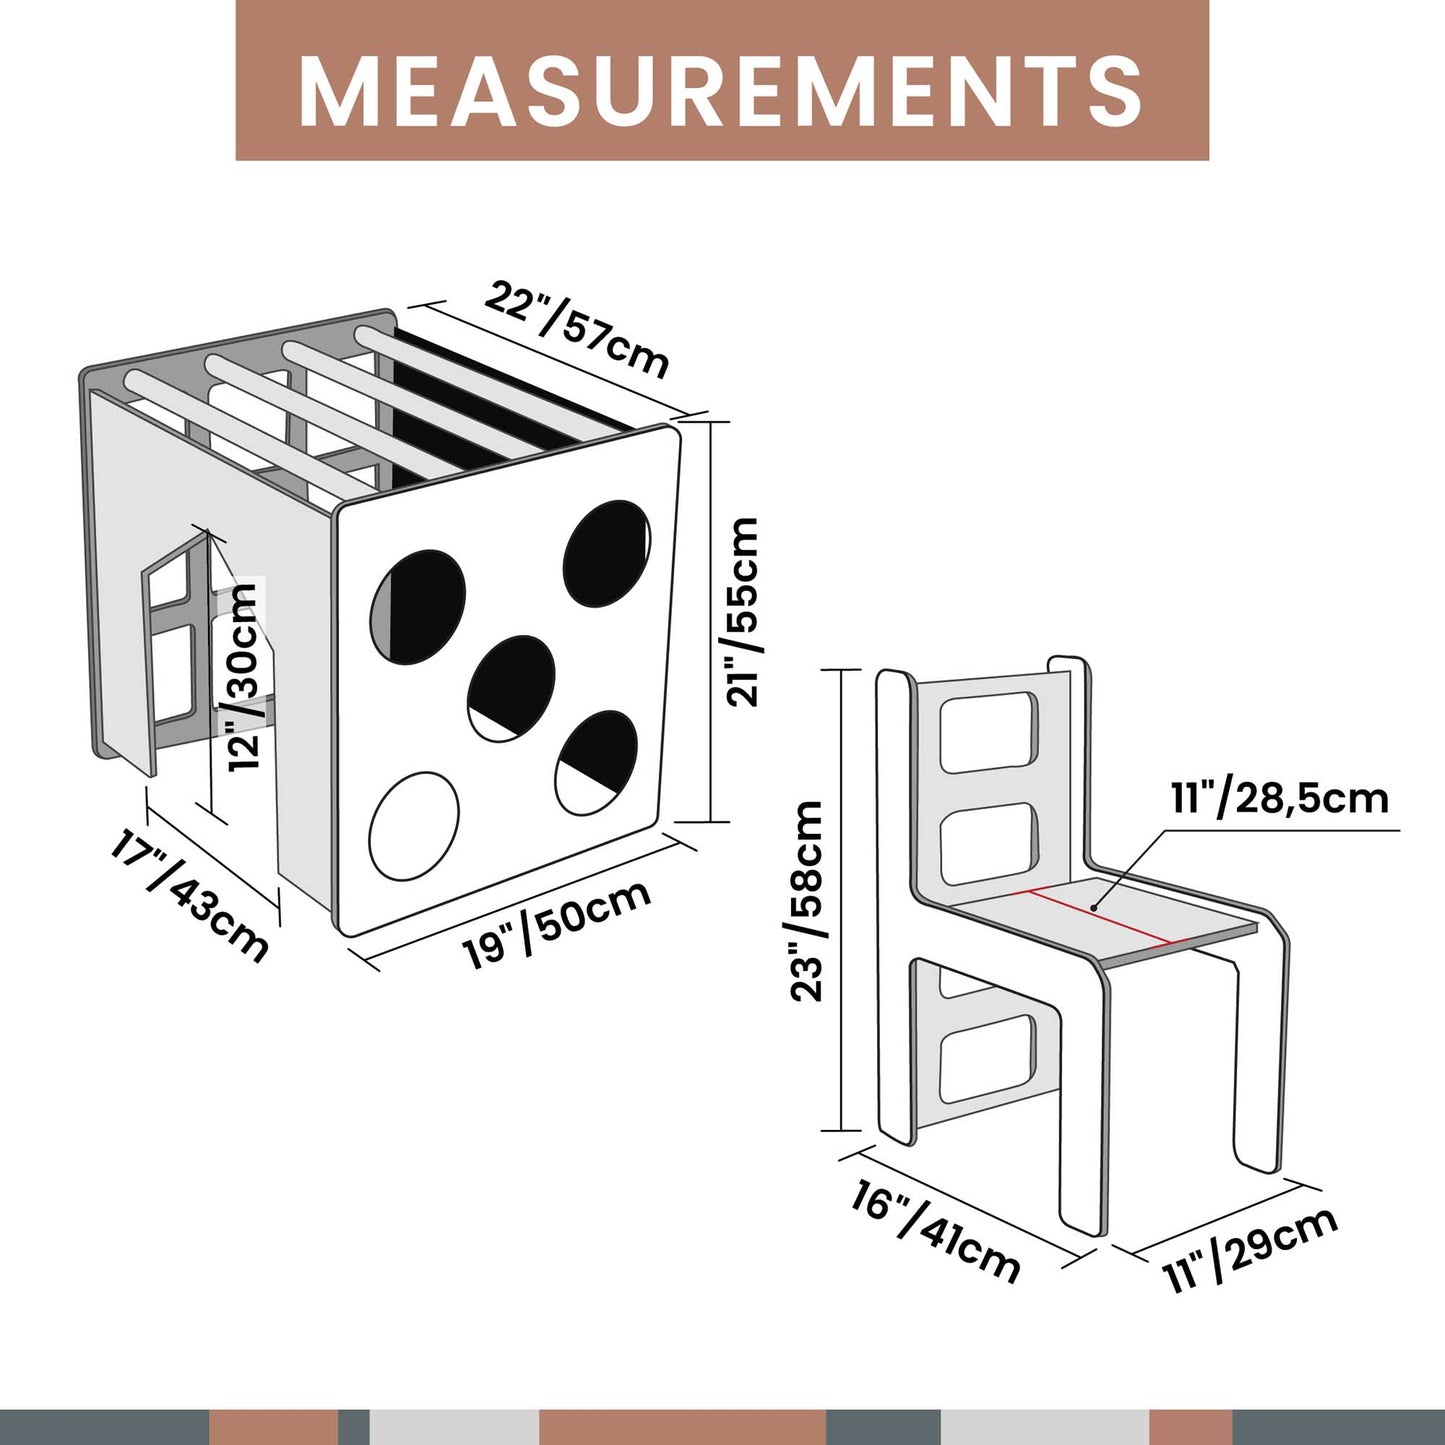 A diagram showing the measurements of a foldable climbing triangle + 2-in-1 cube / table and chair + a ramp in an indoor climbing set.